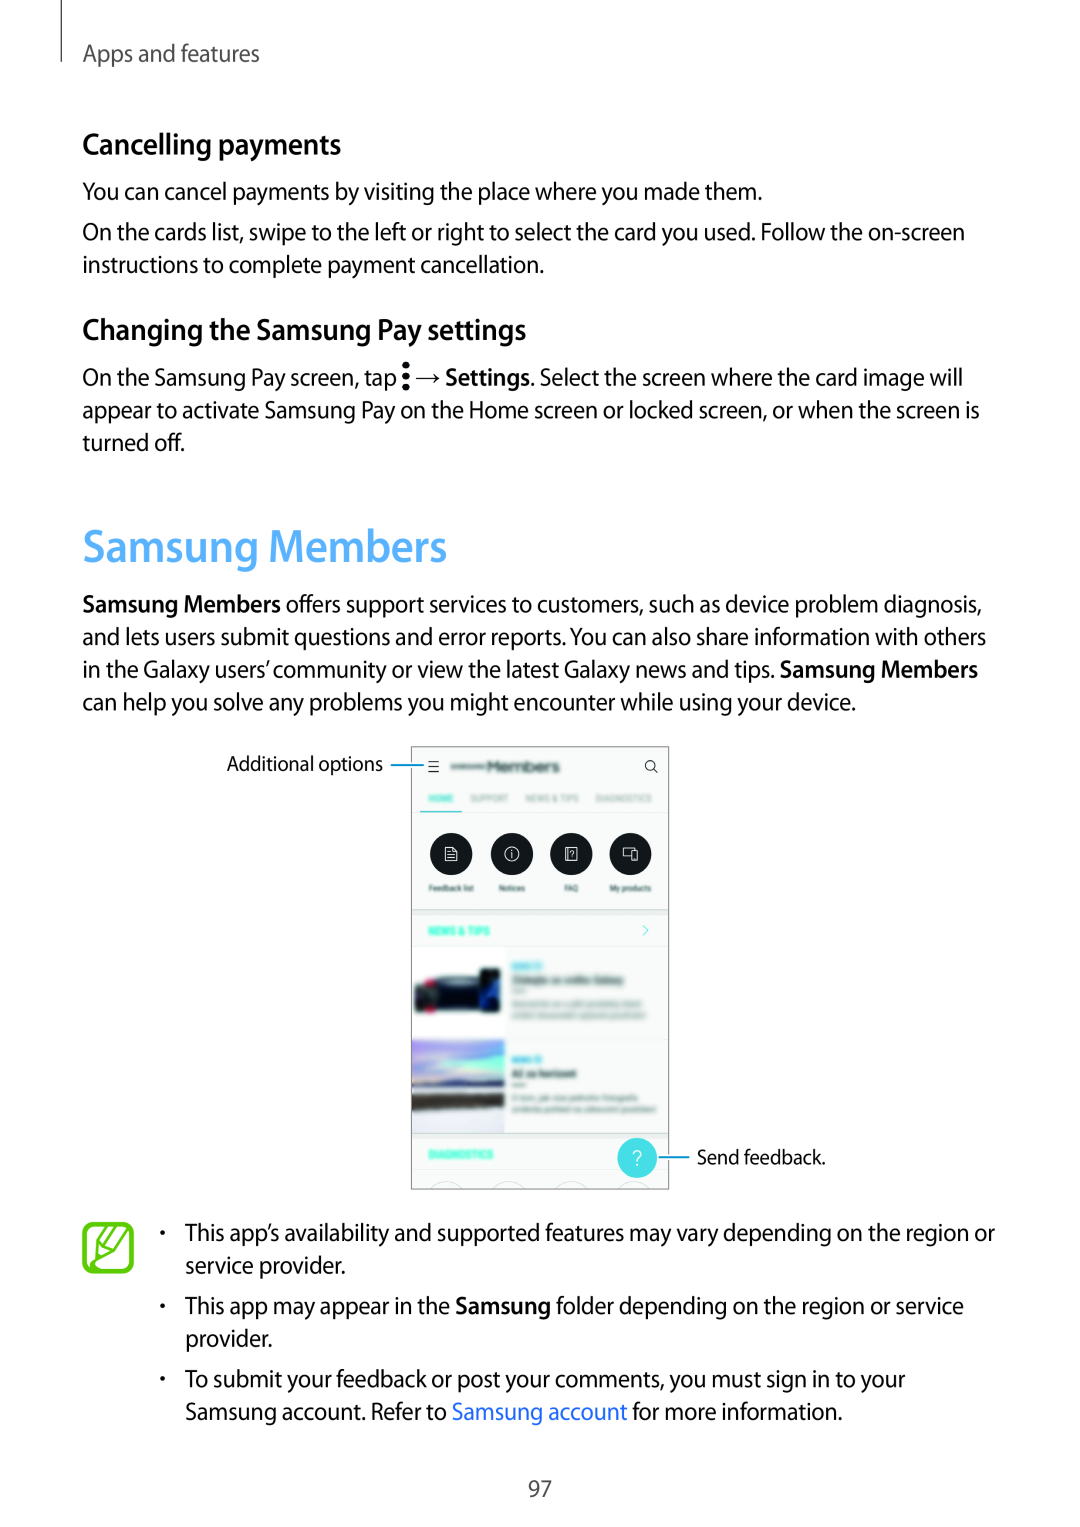 Samsung SM-A520FZKACYV manual Samsung Members, Cancelling payments, Changing the Samsung Pay settings, Apps and features 